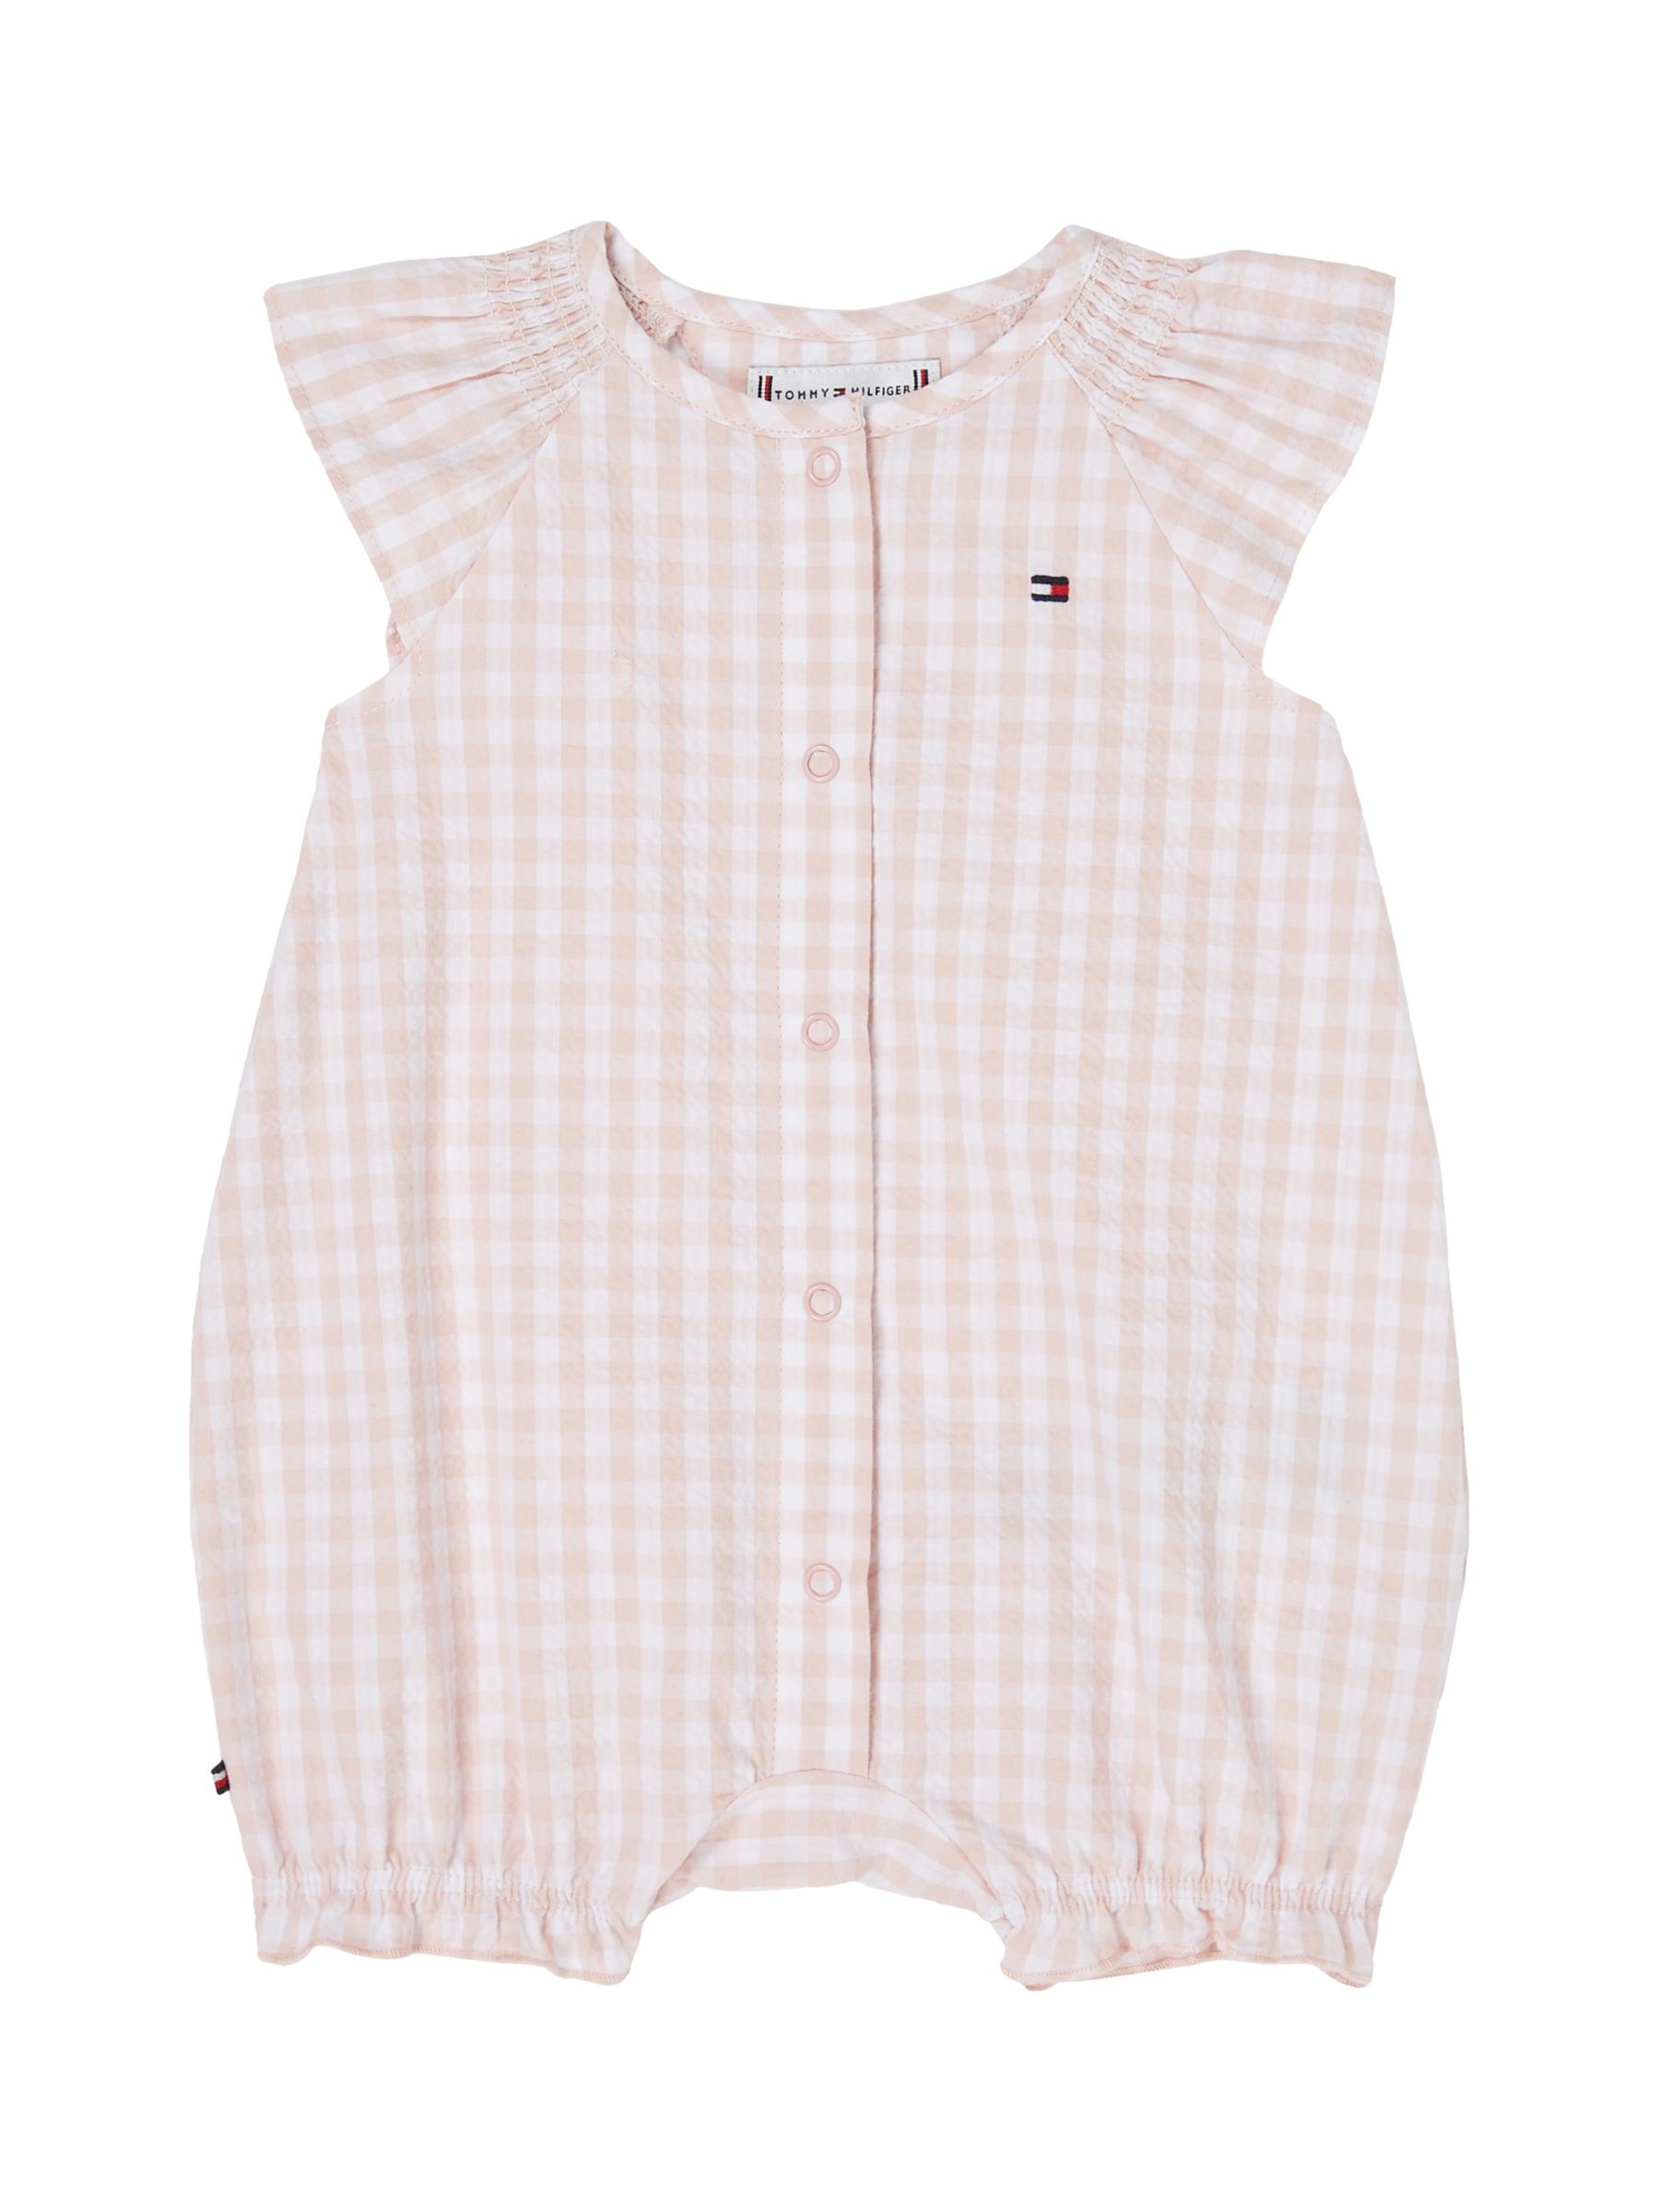 Tommy Hilfiger Baby Flag Logo Gingham Shortall, White/Pink, 0-3 months